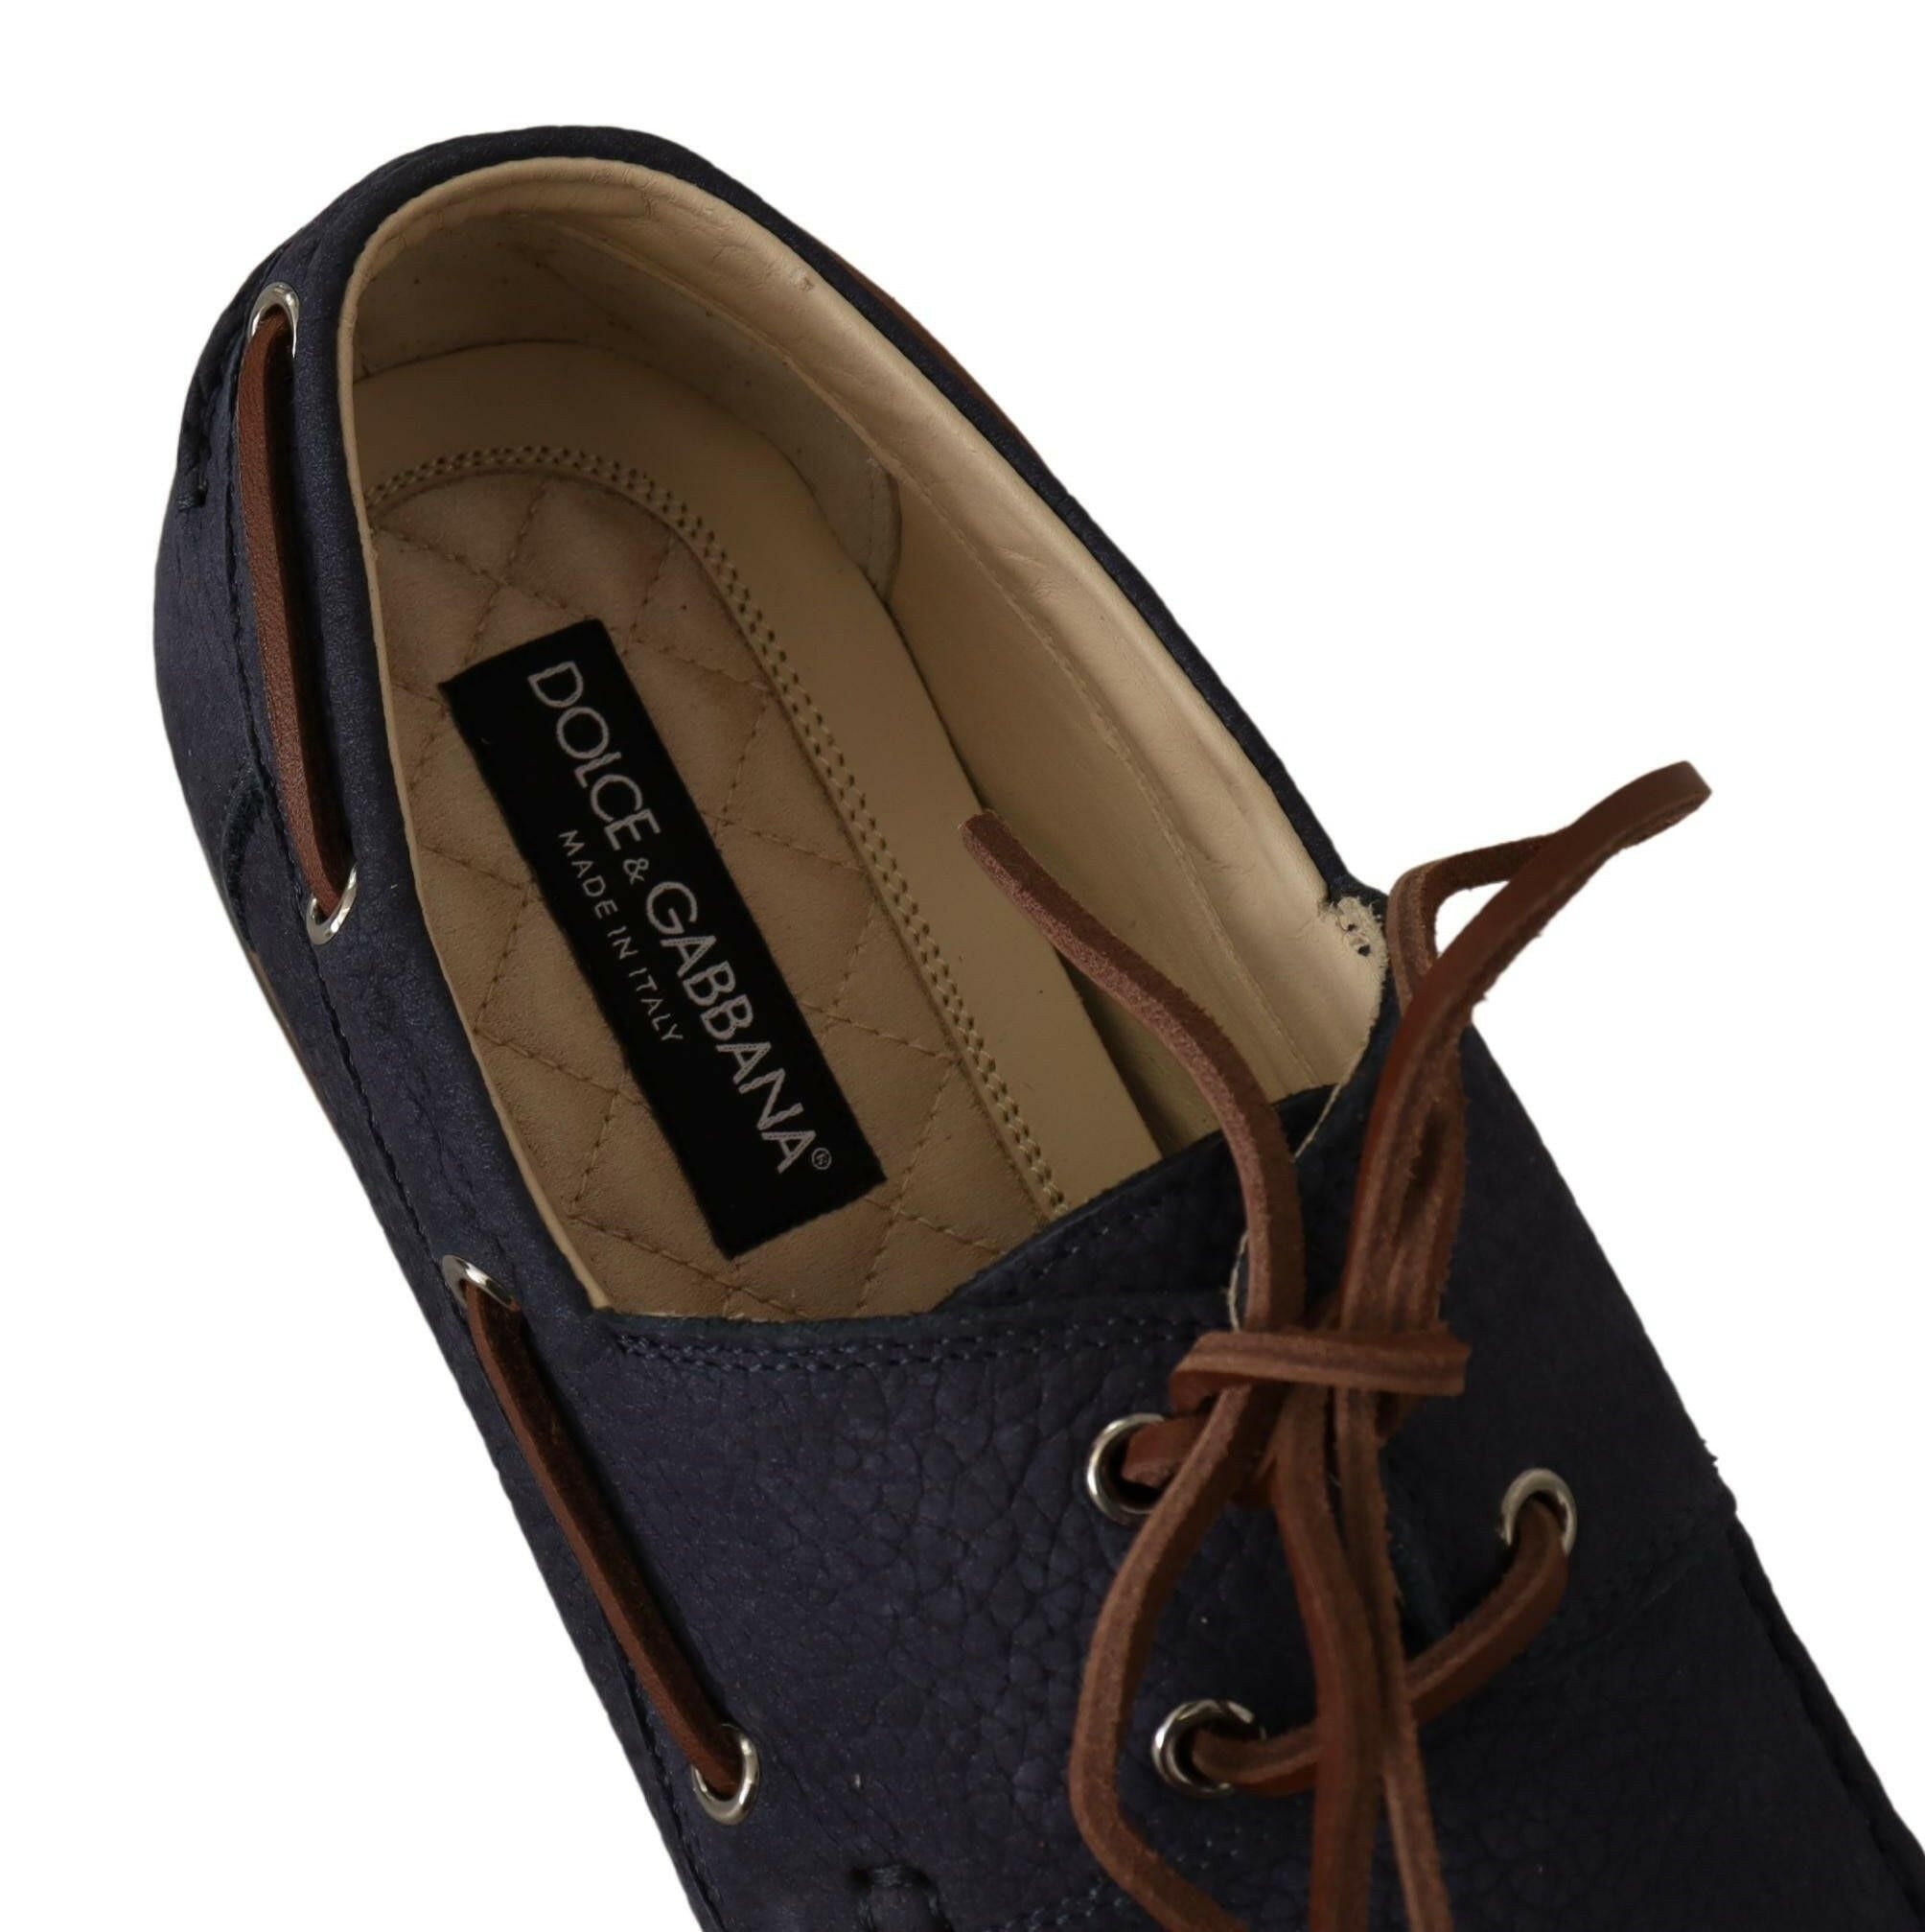 Dolce & Gabbana Blue Leather Lace Up Men Casual Boat Shoes - GENUINE AUTHENTIC BRAND LLC  